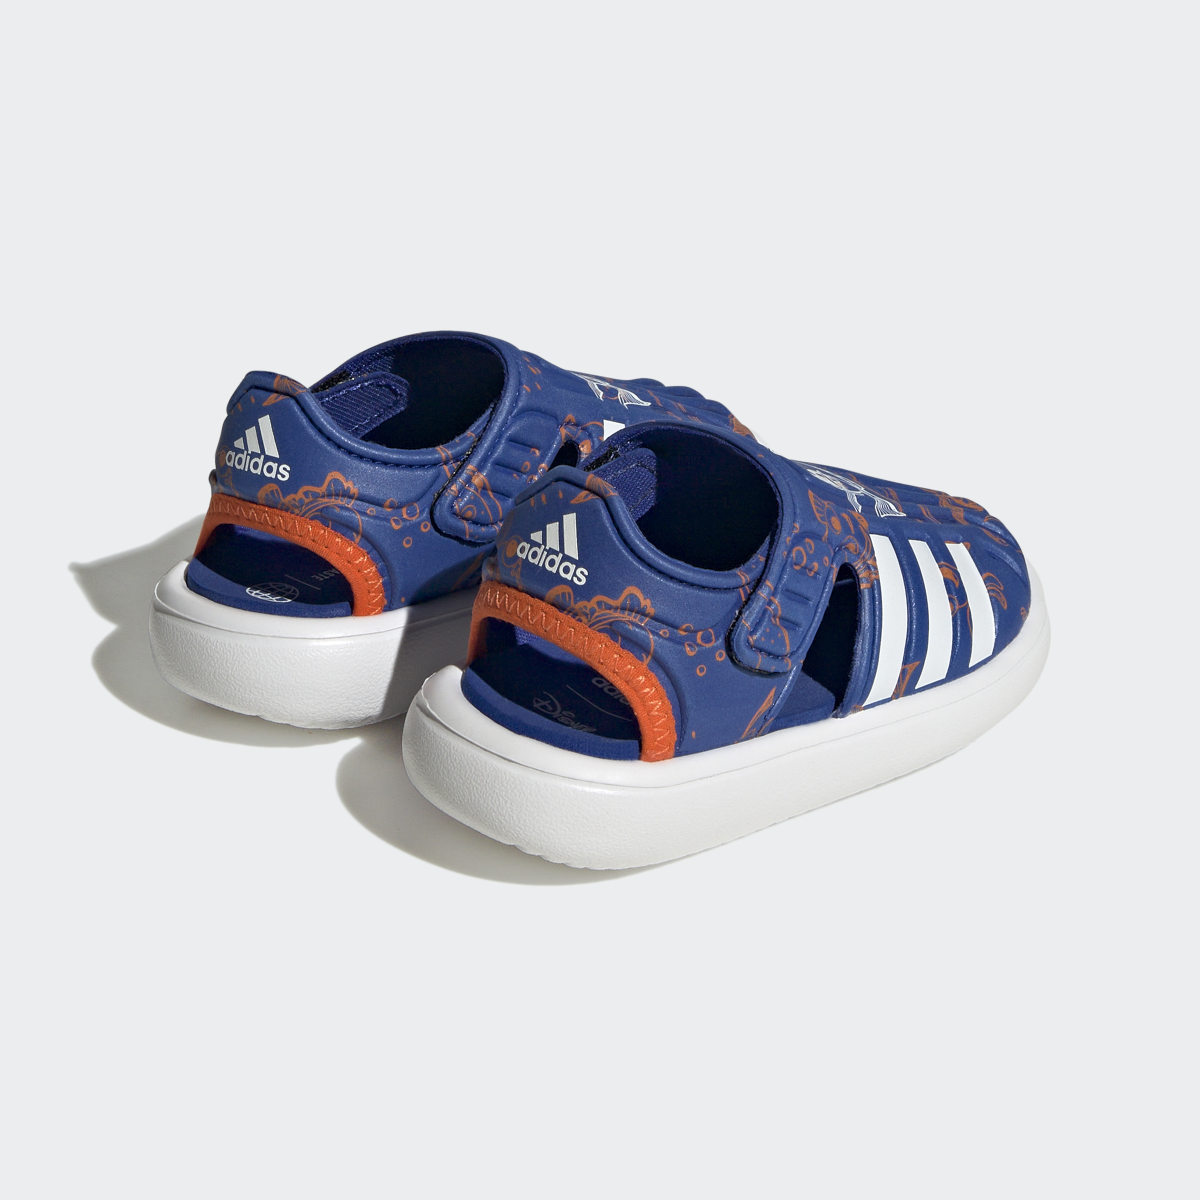 Adidas x Disney Finding Nemo and Dory Closed Toe Summer Water Sandals. 6